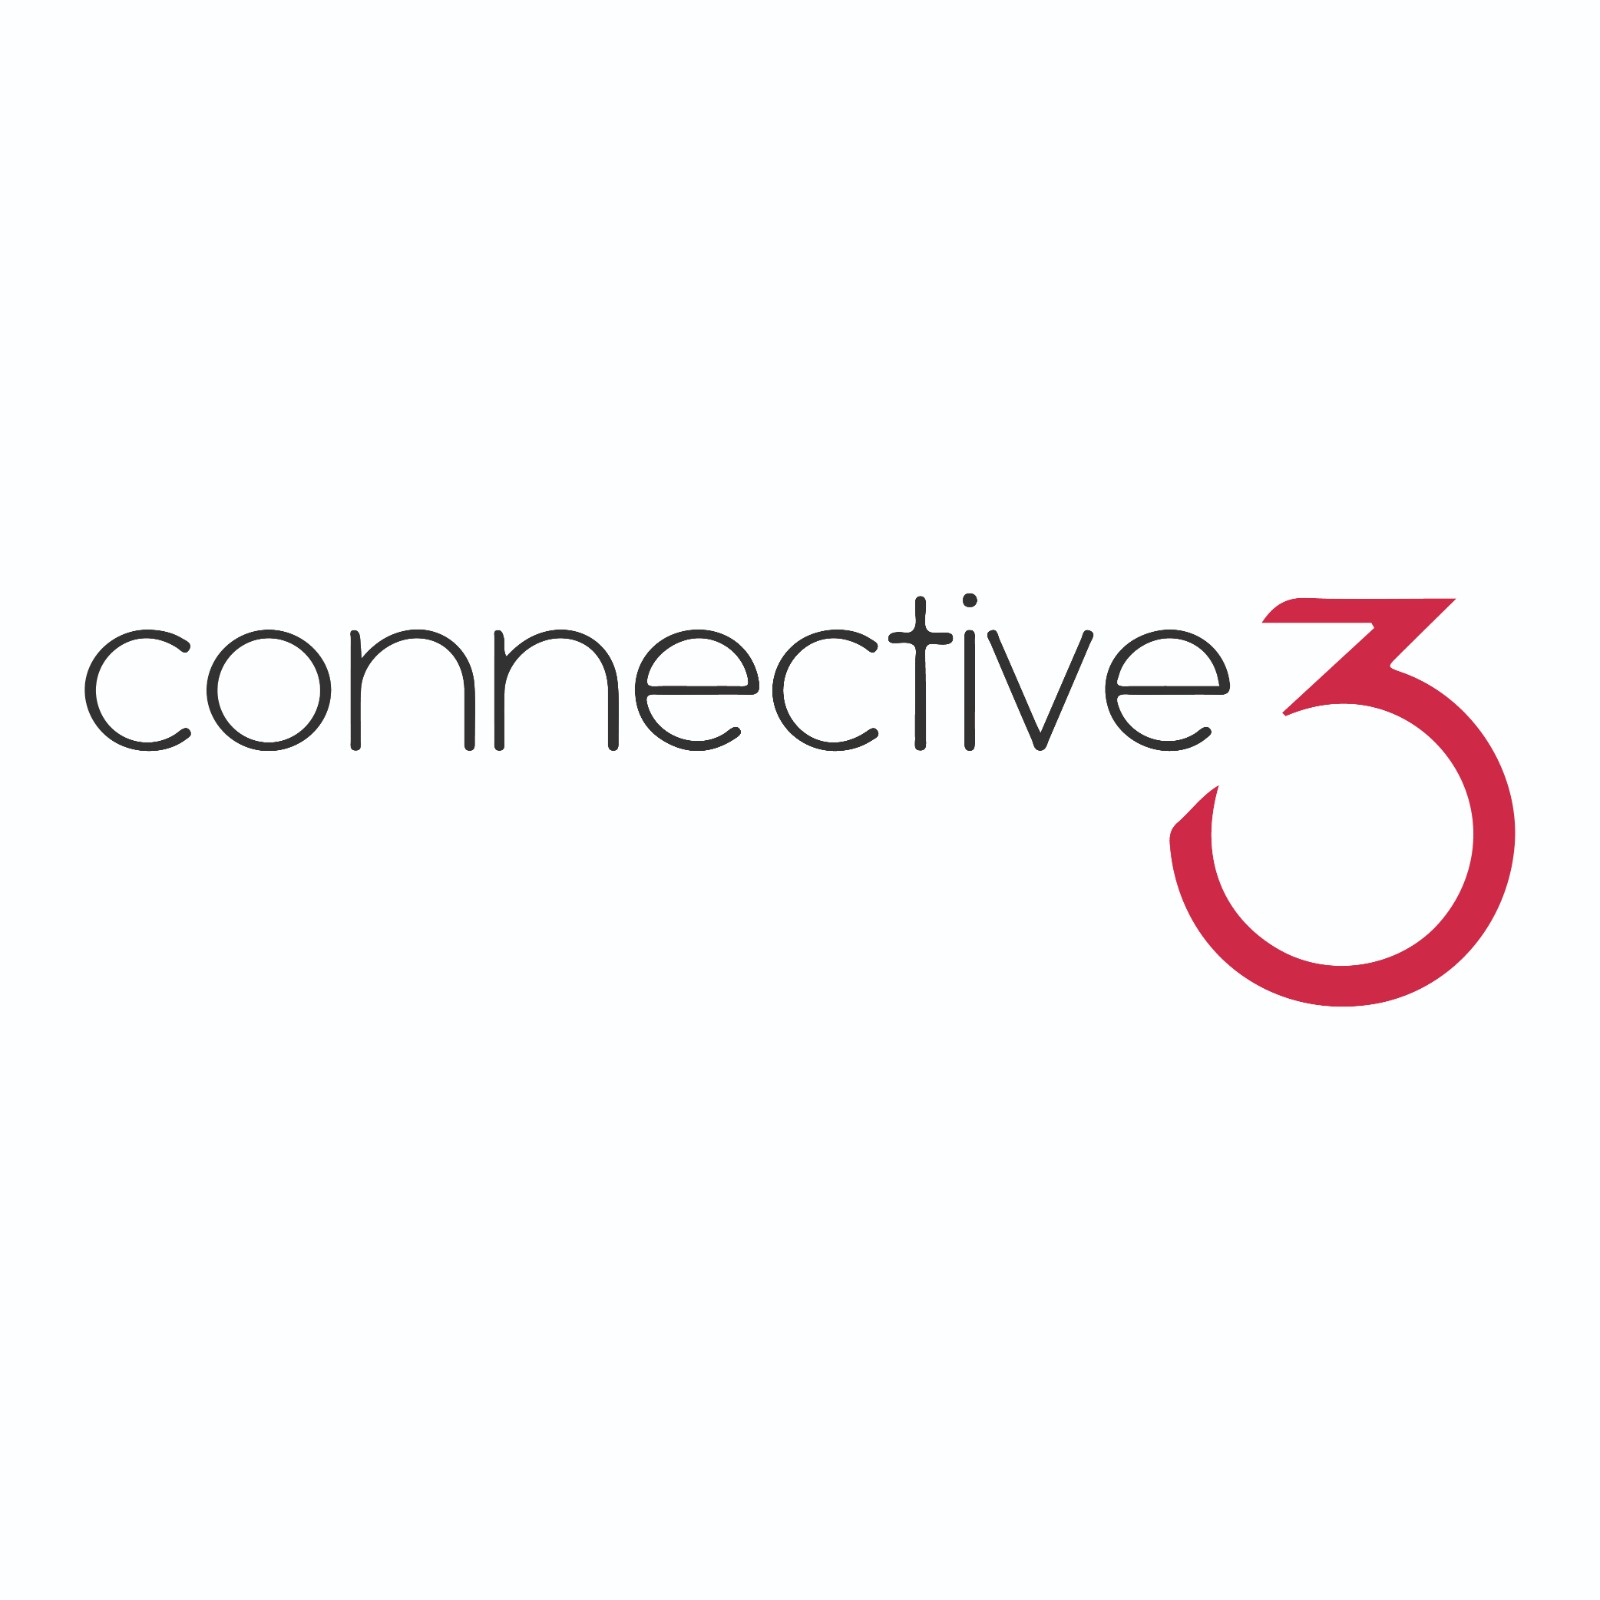 connective3